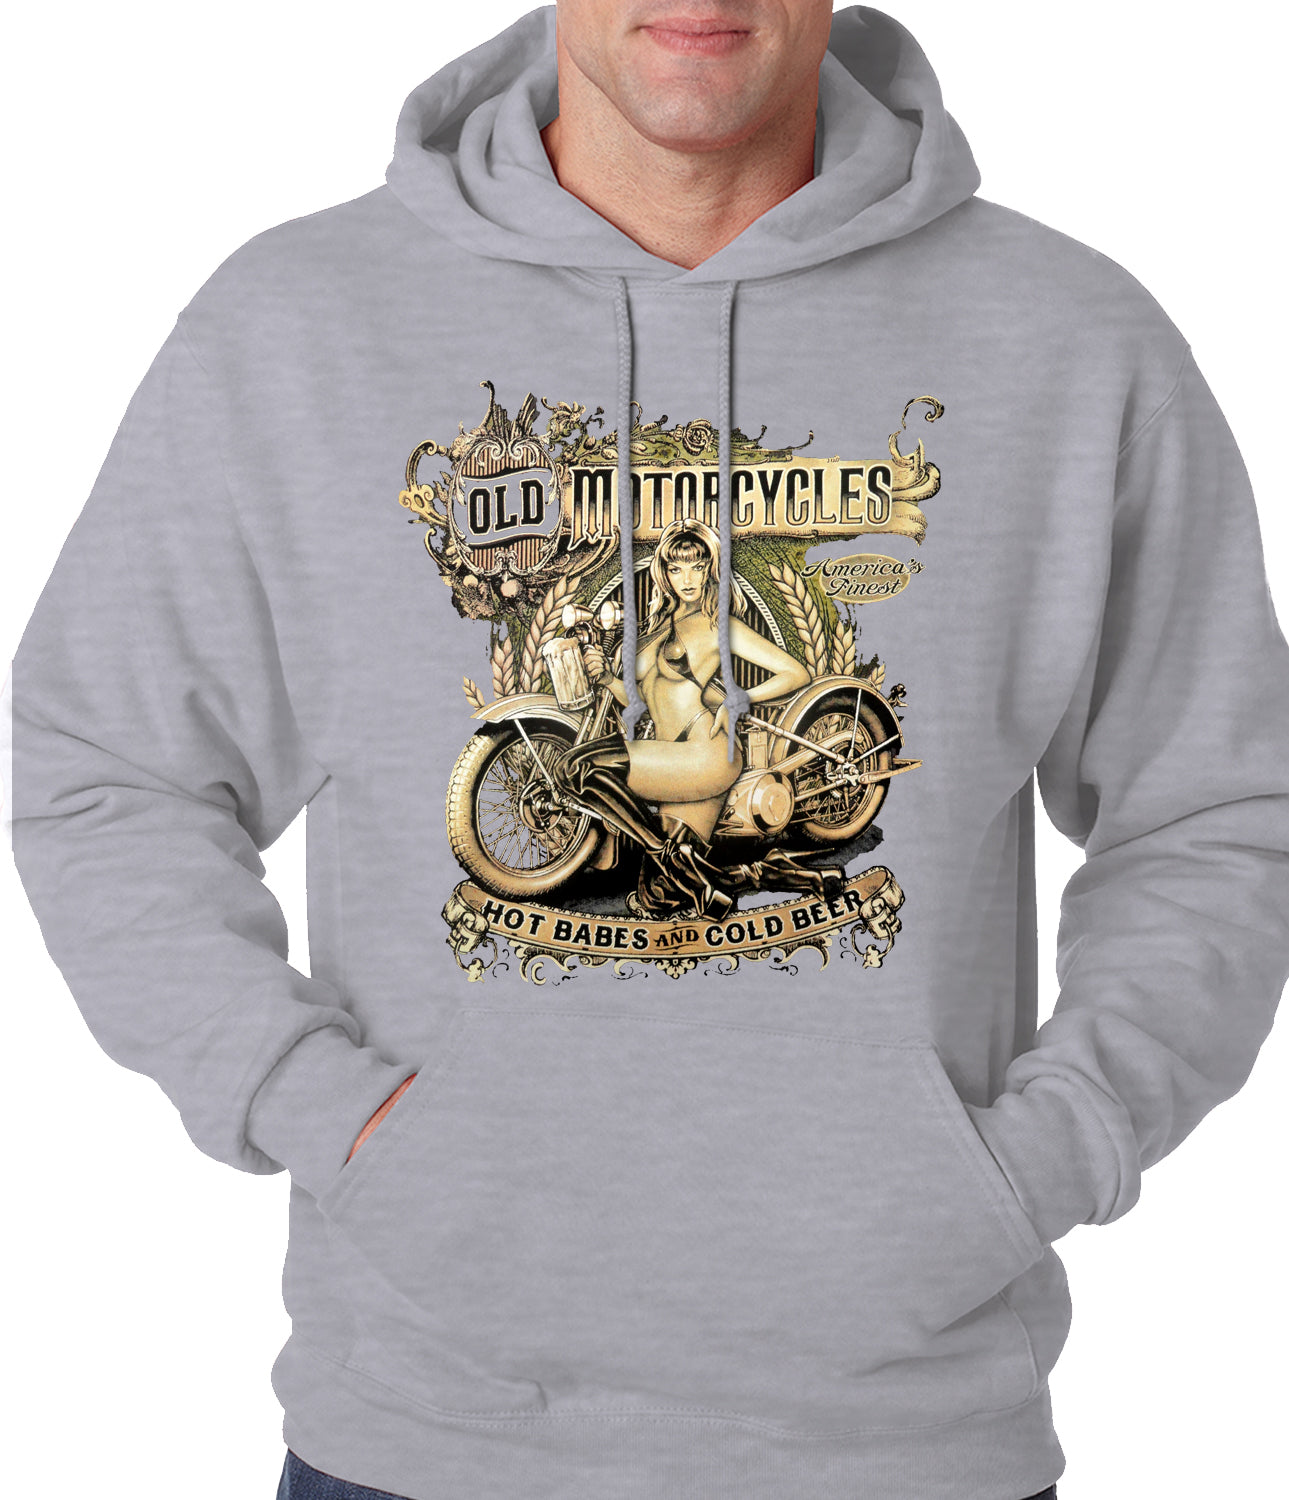 Hot Babes and Cold Beer Biker Adult Hoodie